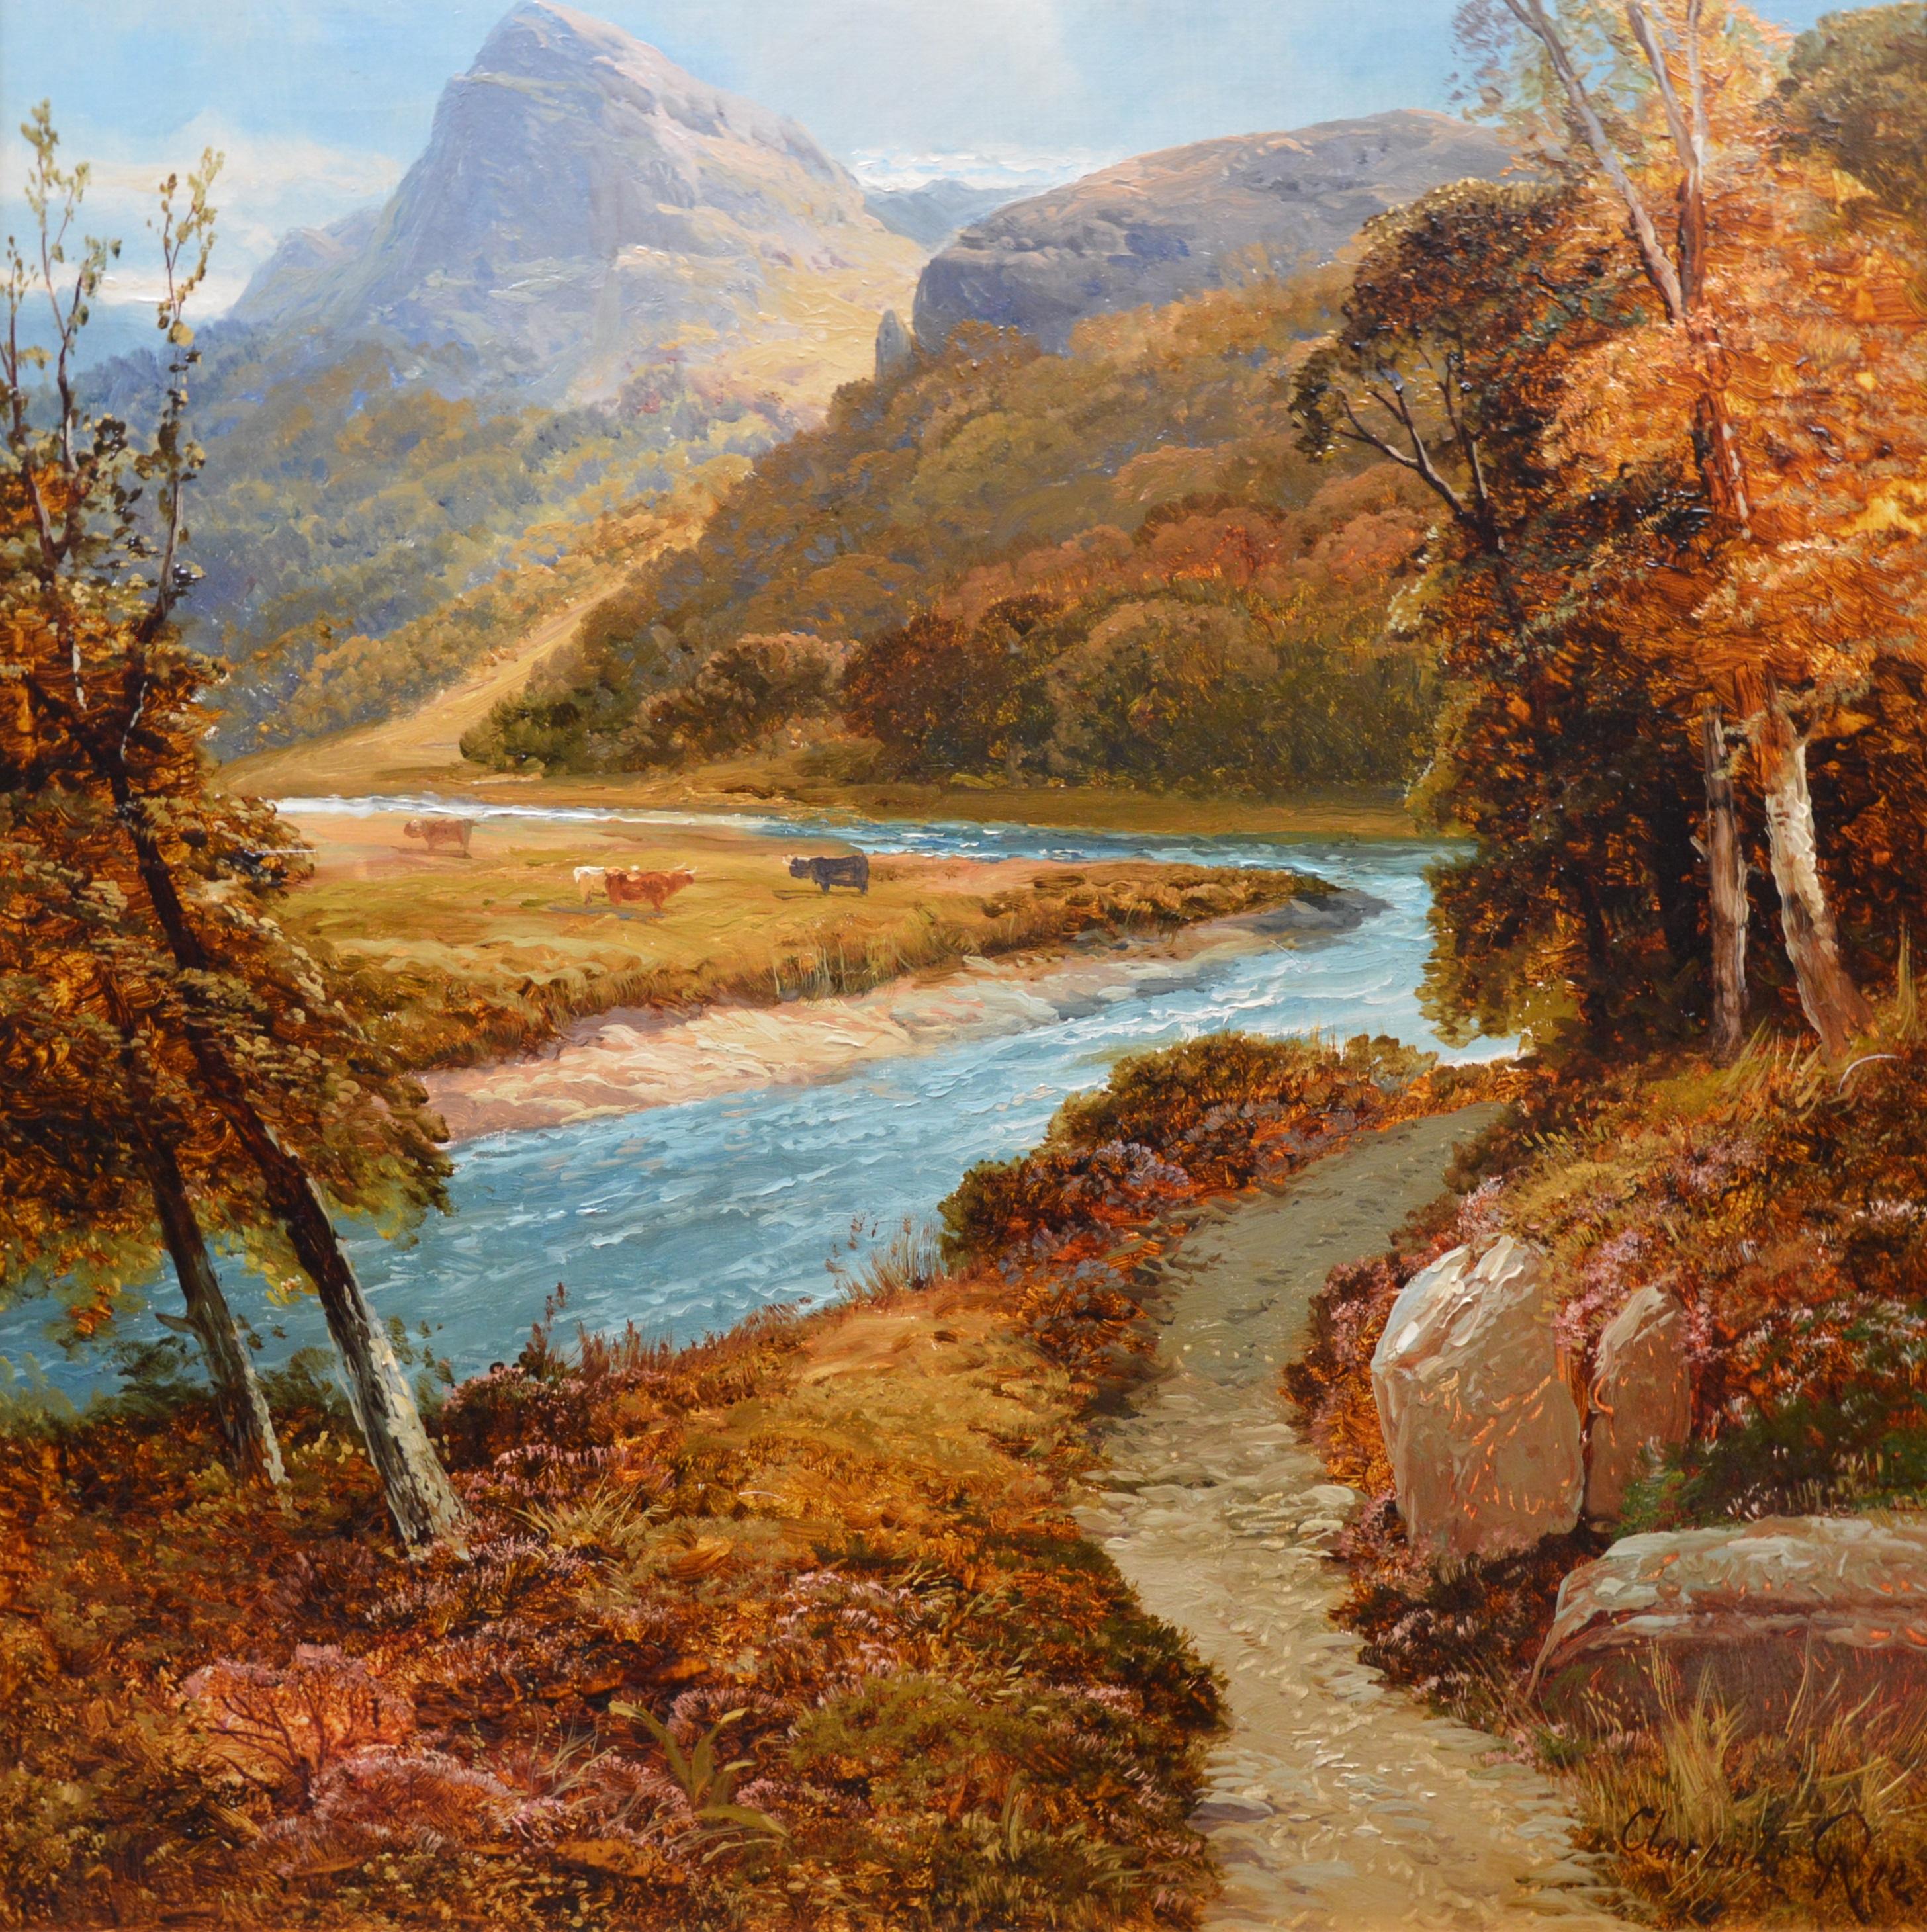 On the River Dee - Large 19th Century Scottish Landscape Oil Painting  - Brown Landscape Painting by Clarence Roe